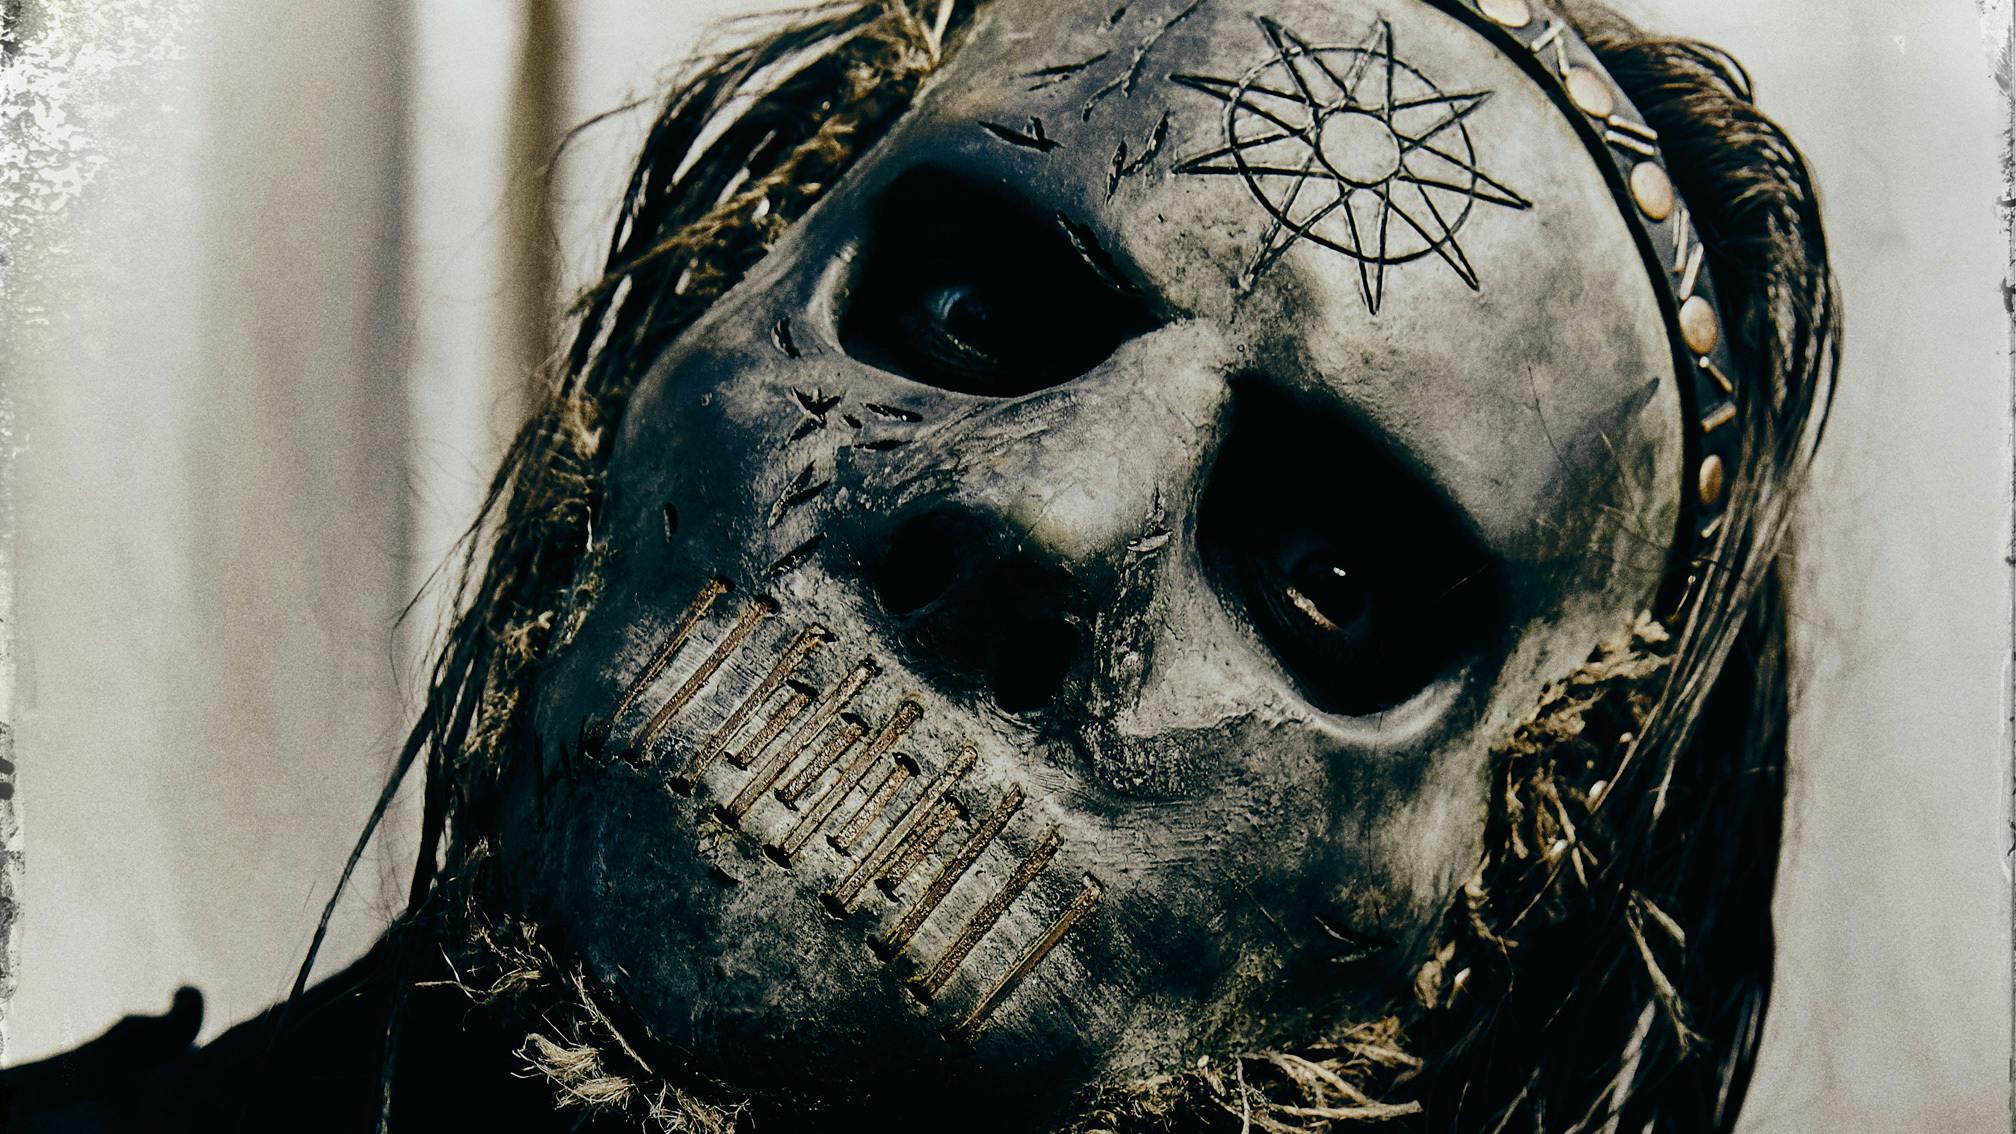 Slipknot have parted ways with drummer Jay Weinberg